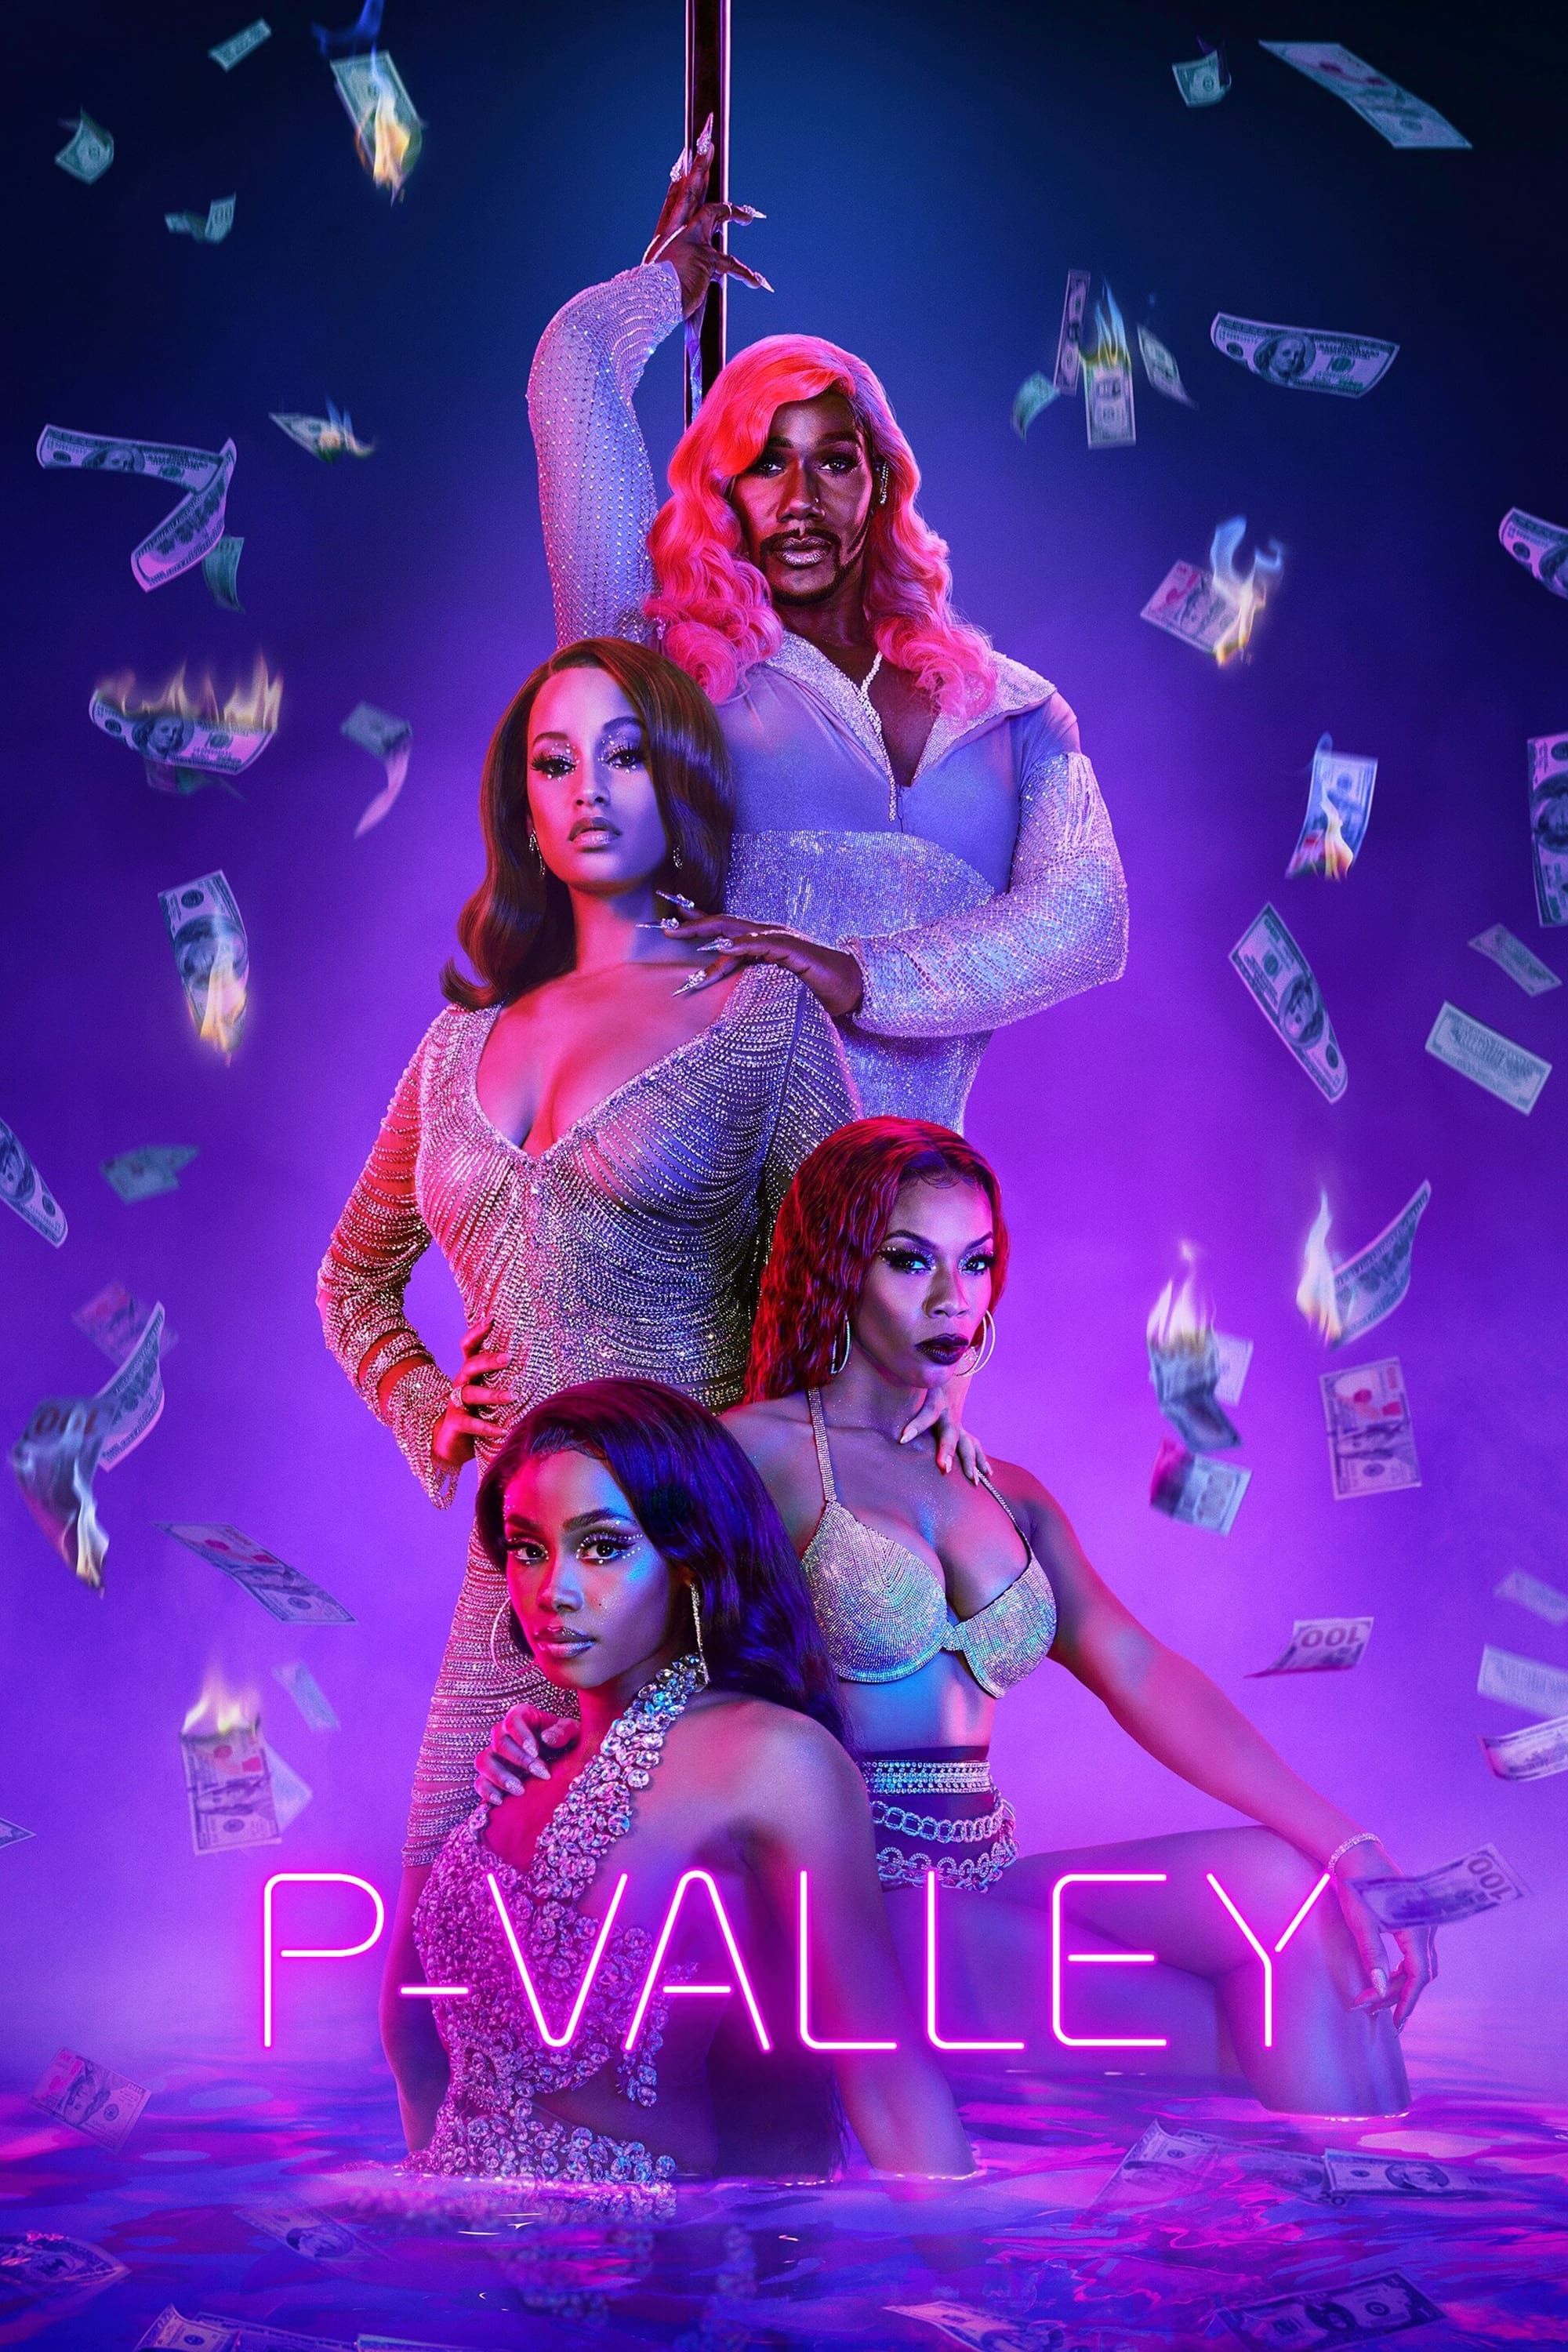 P-Valley TV Shows About Domestic Violence